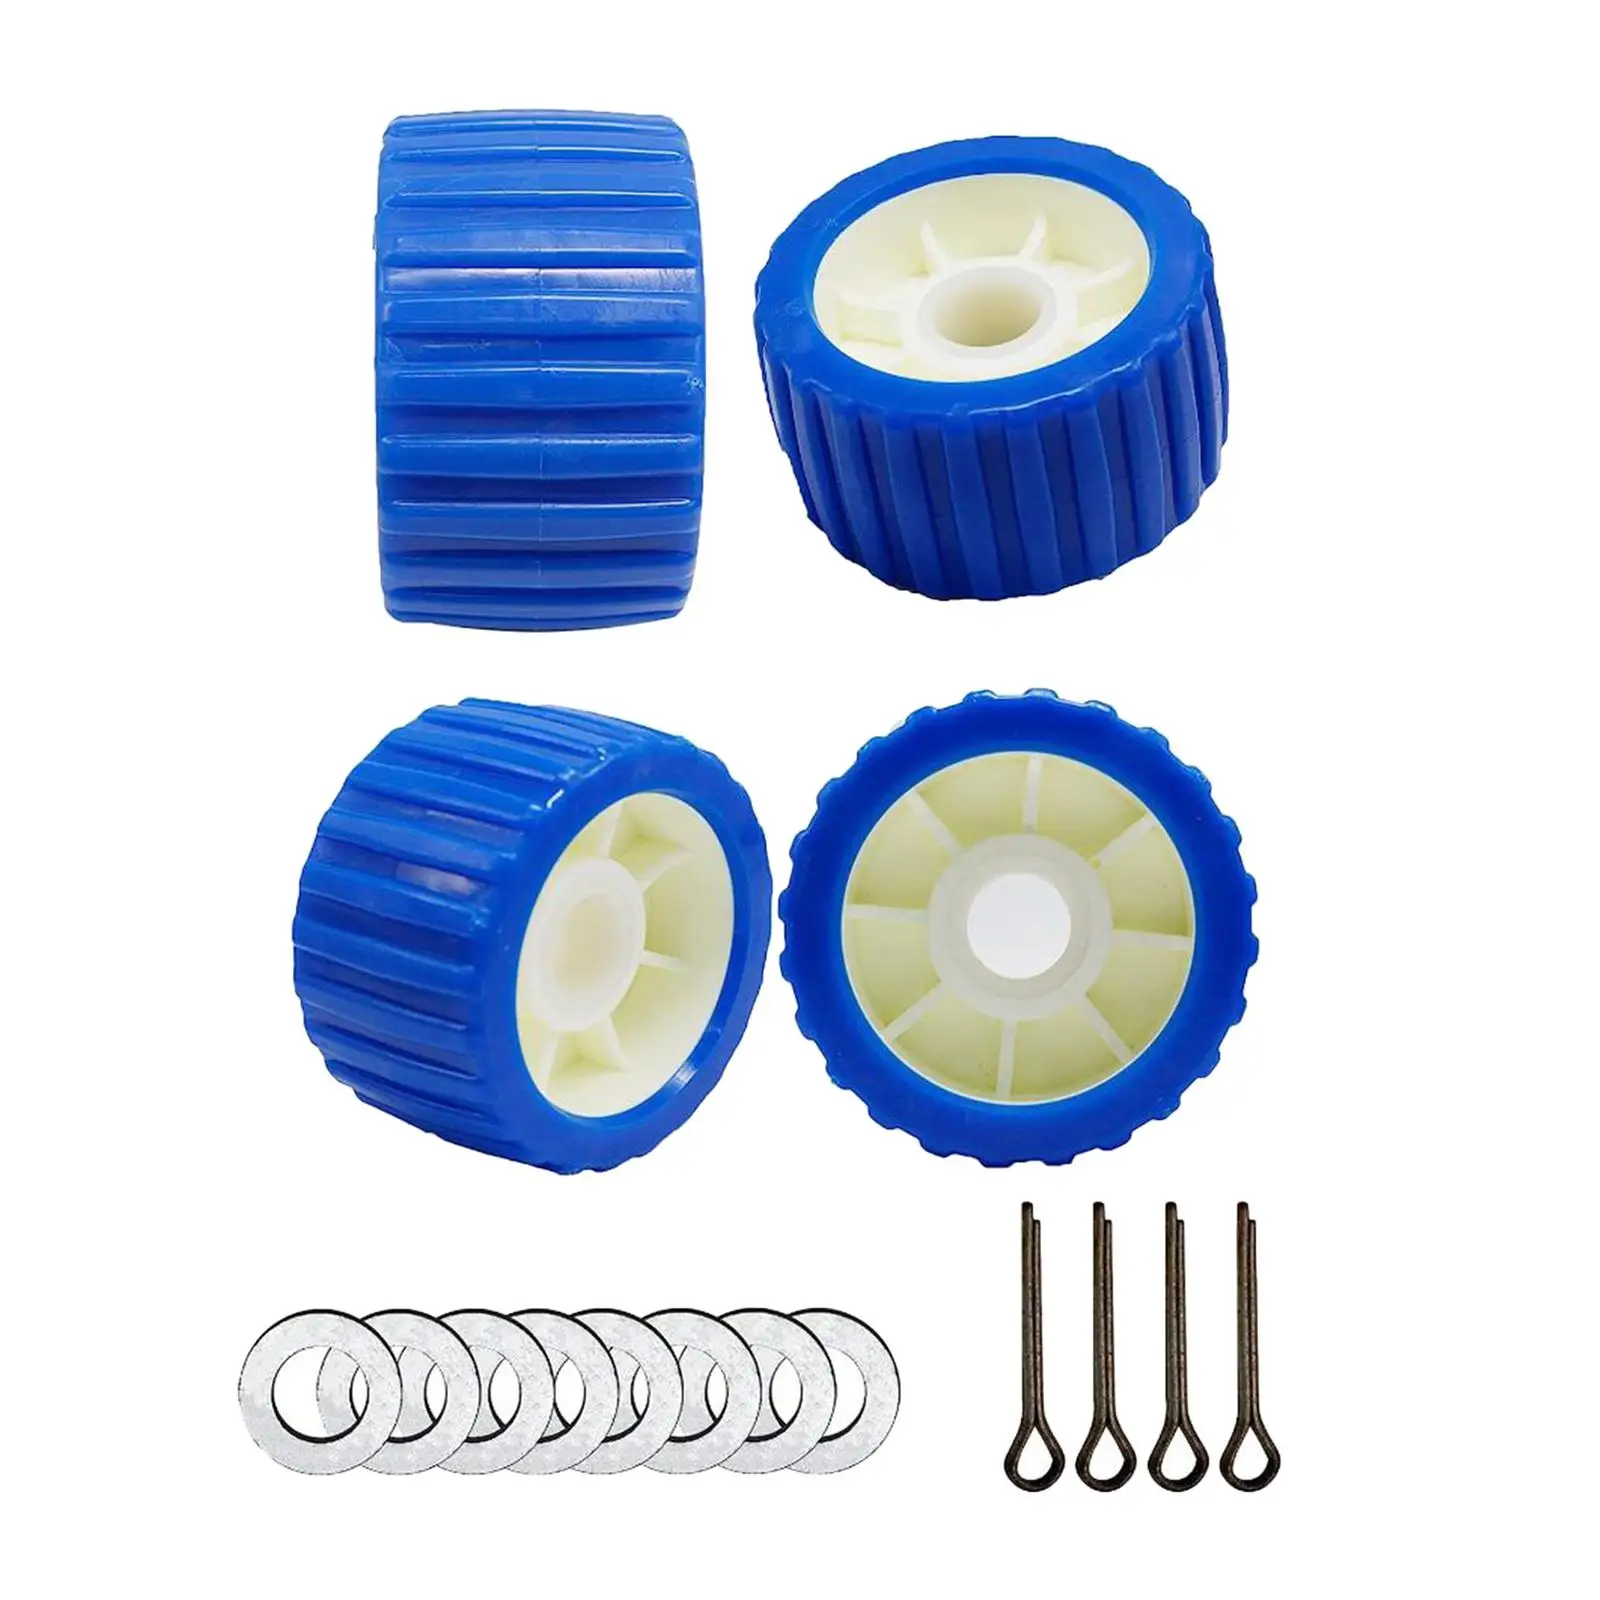 Boat Trailer Roller Accessories for Trailers Motor Yacht Rubber Boat